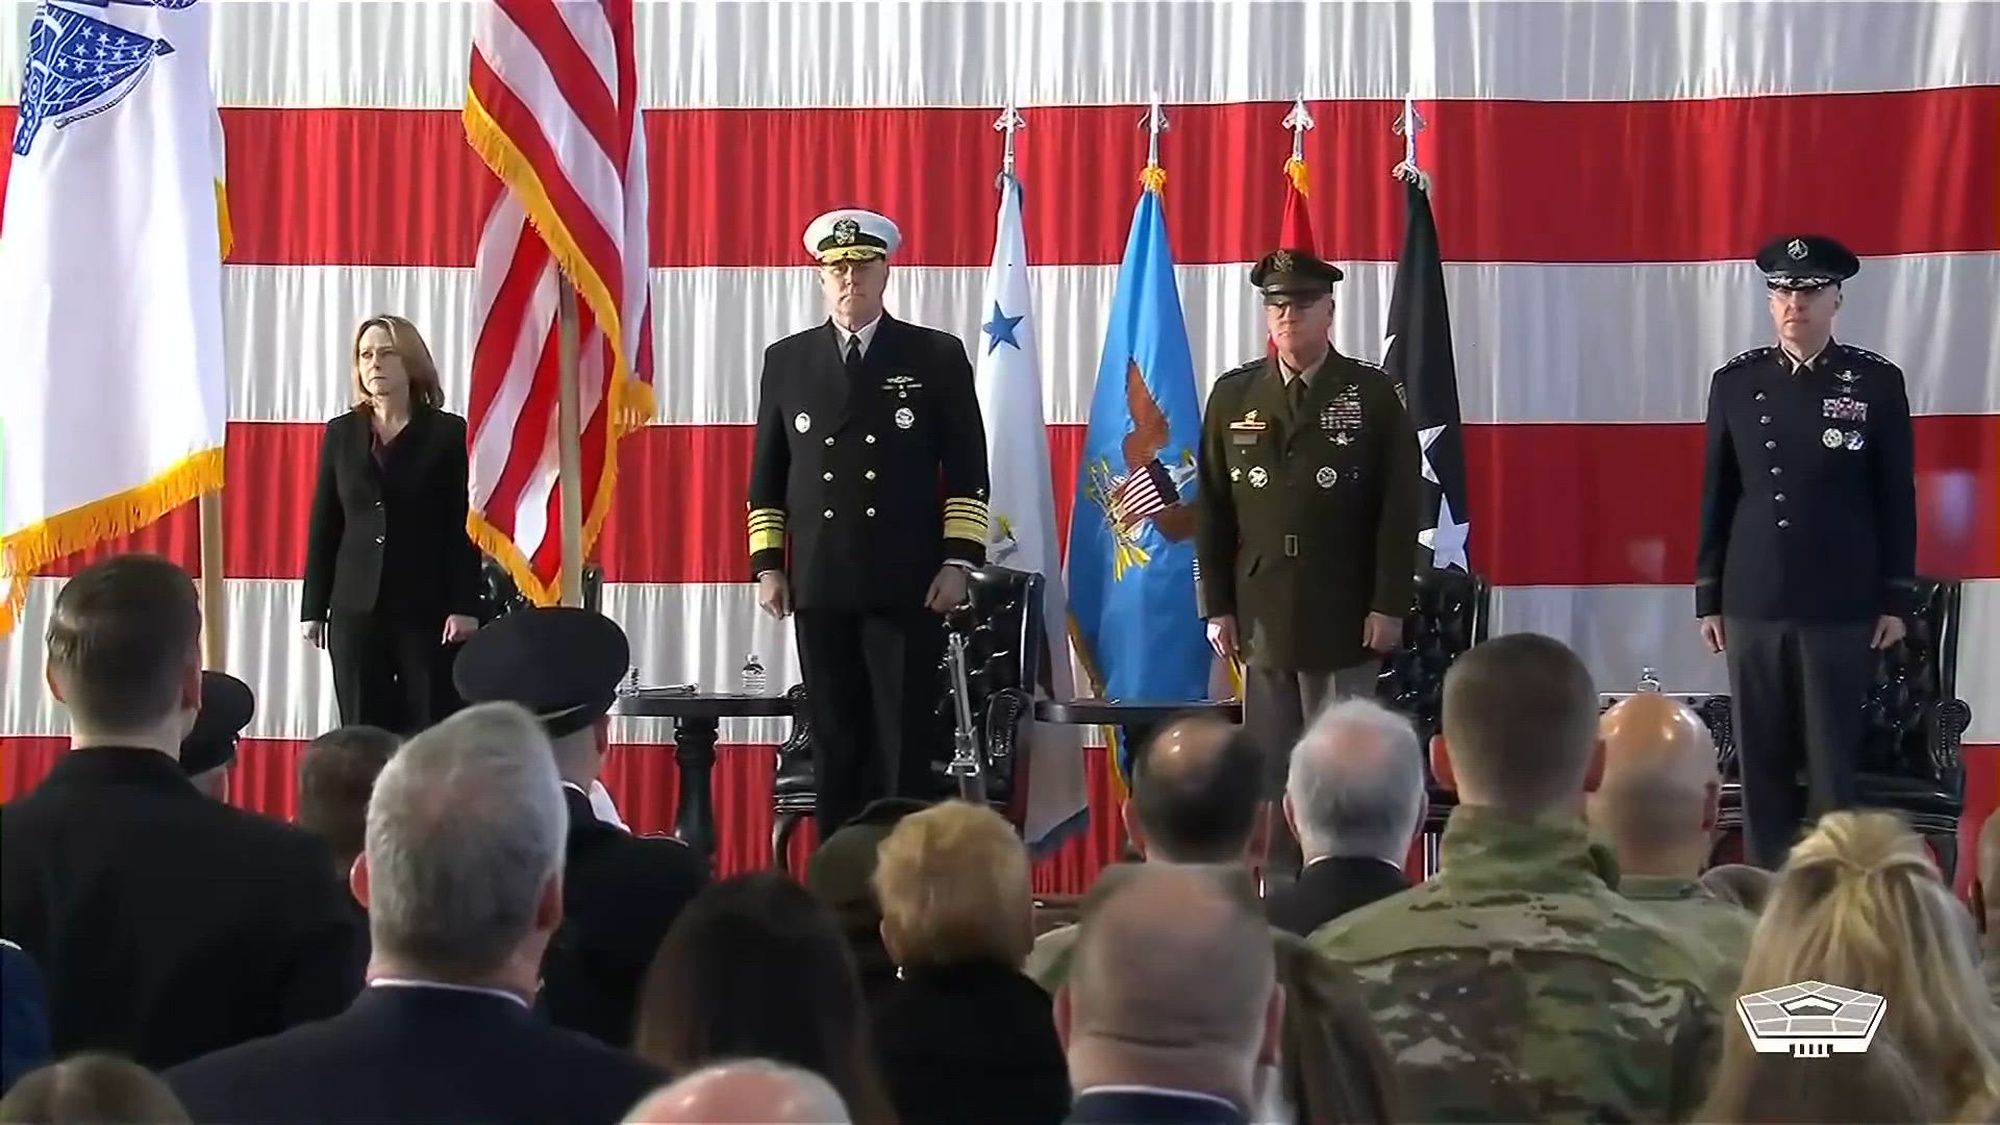 Service members and Deputy Secretary Hicks stand on a flag-draped stage facing an audience.